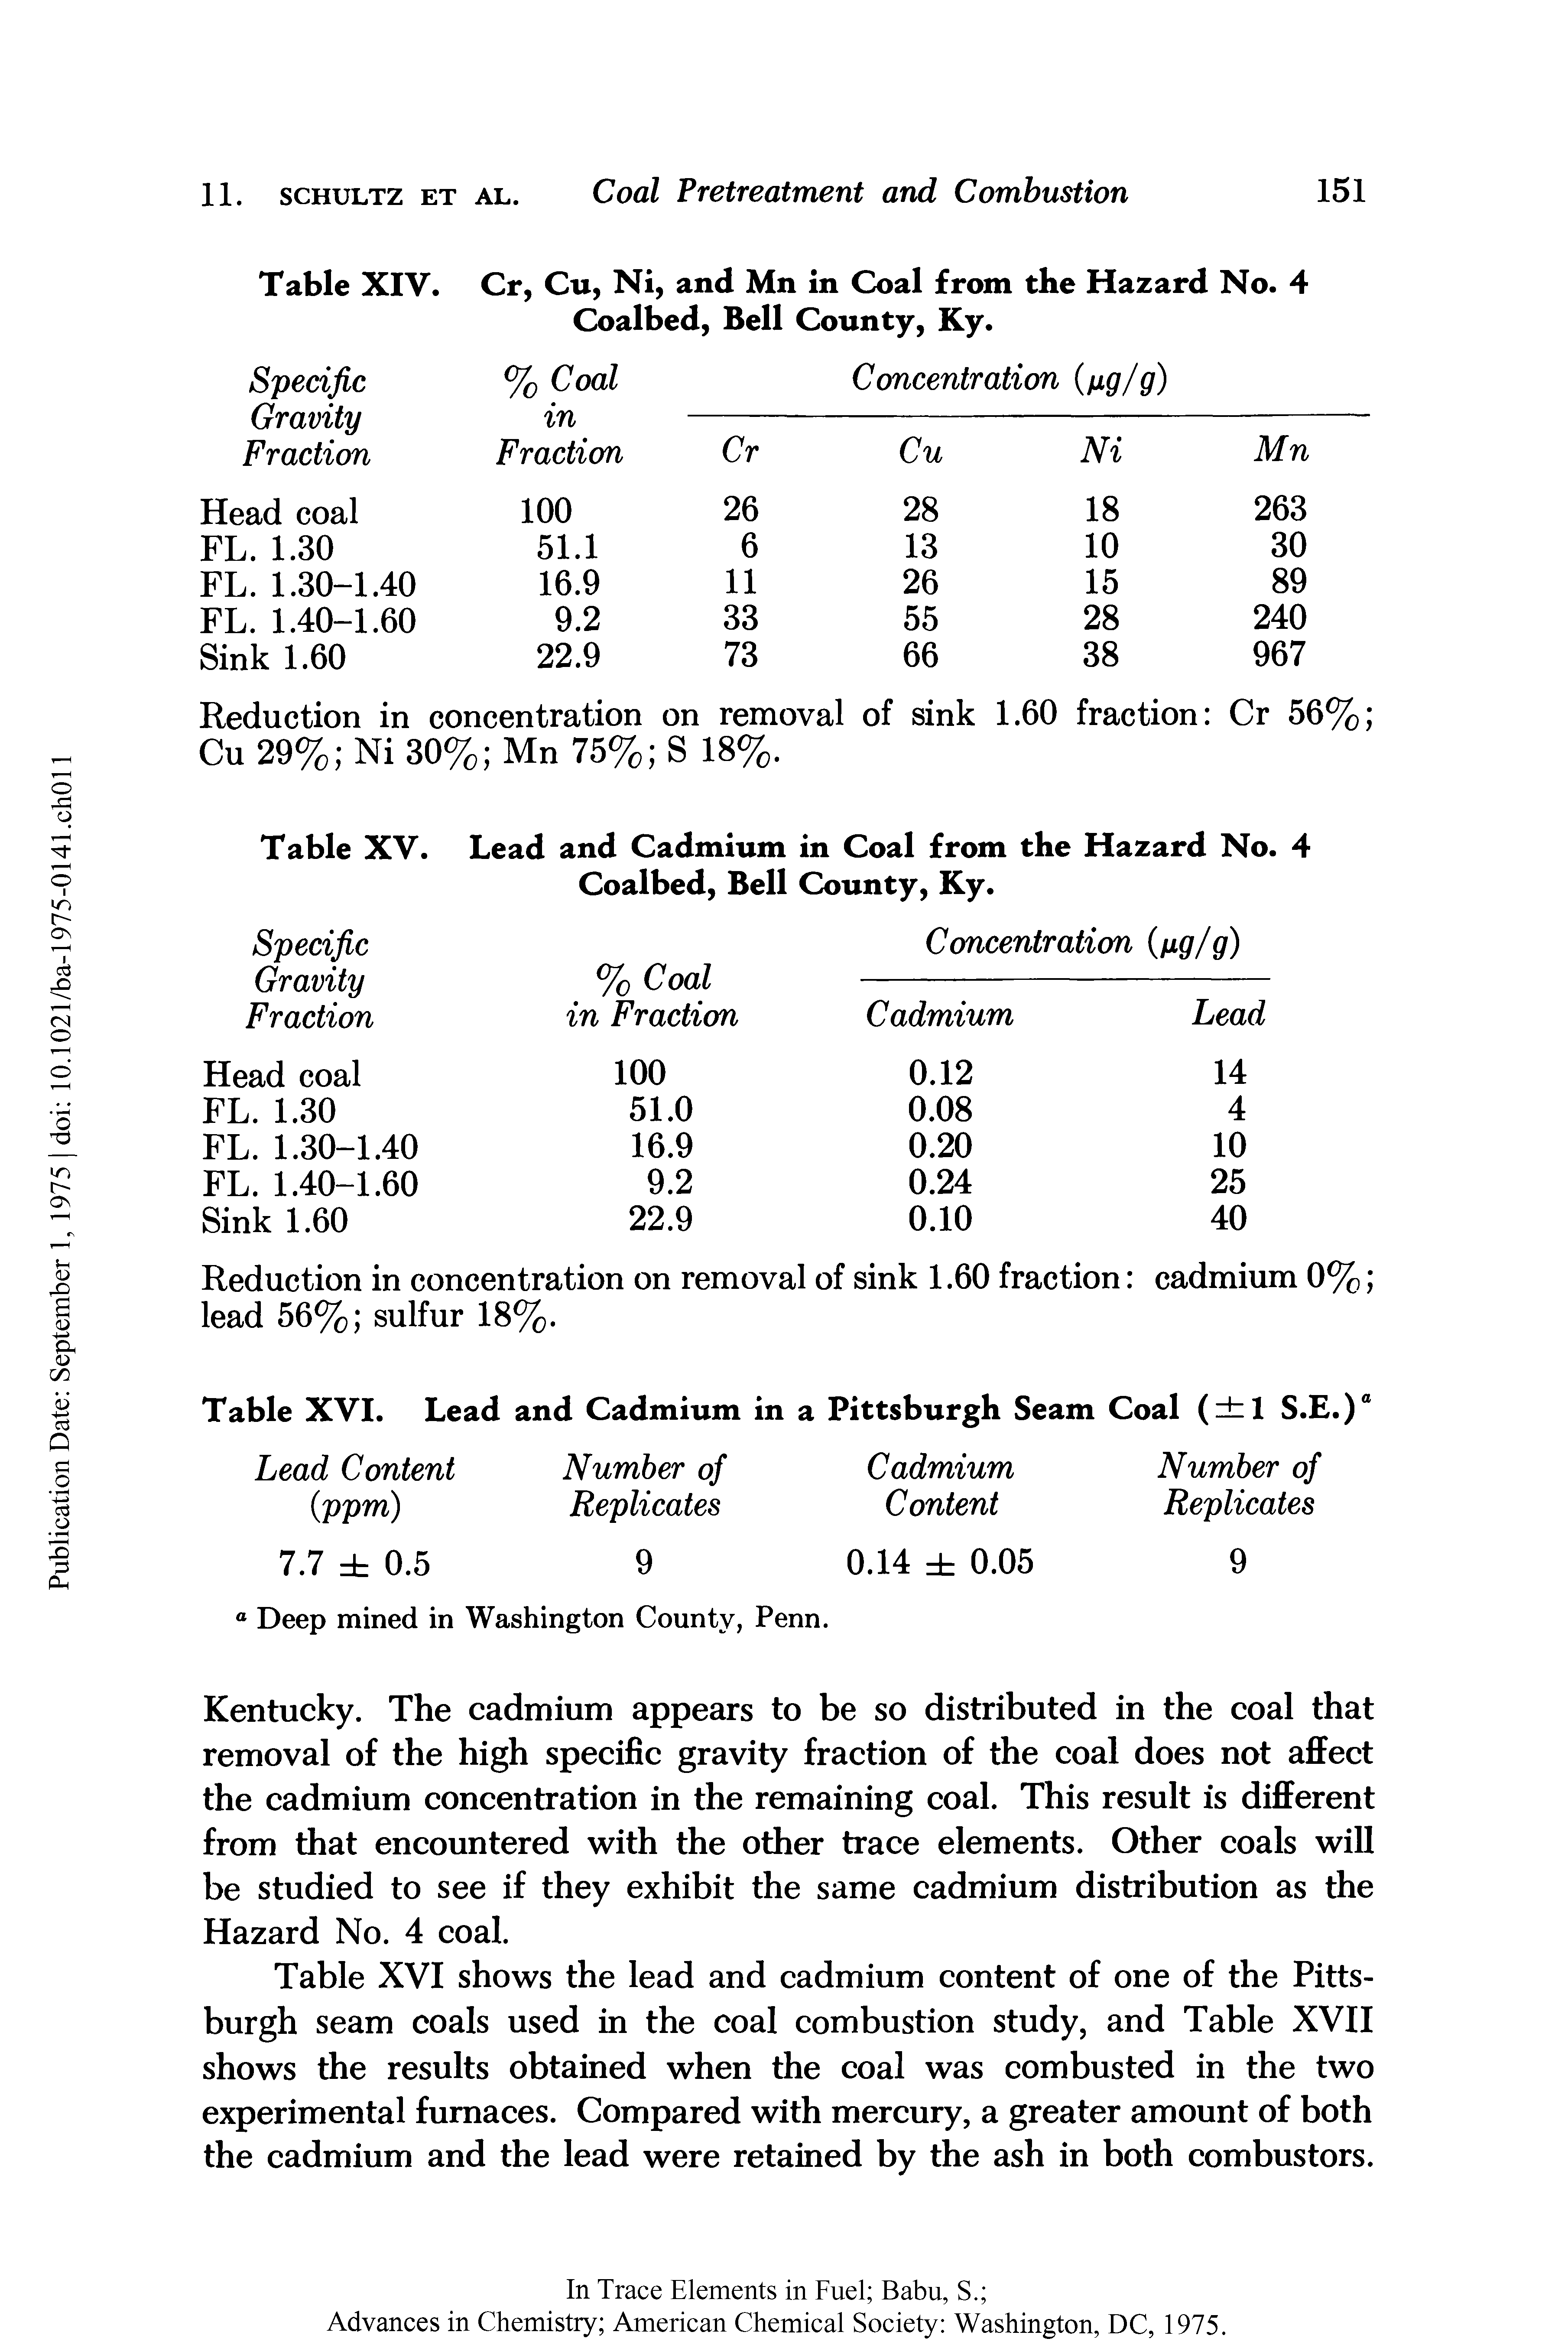 Table XVI shows the lead and cadmium content of one of the Pittsburgh seam coals used in the coal combustion study, and Table XVII shows the results obtained when the coal was combusted in the two experimental furnaces. Compared with mercury, a greater amount of both the cadmium and the lead were retained by the ash in both combustors.